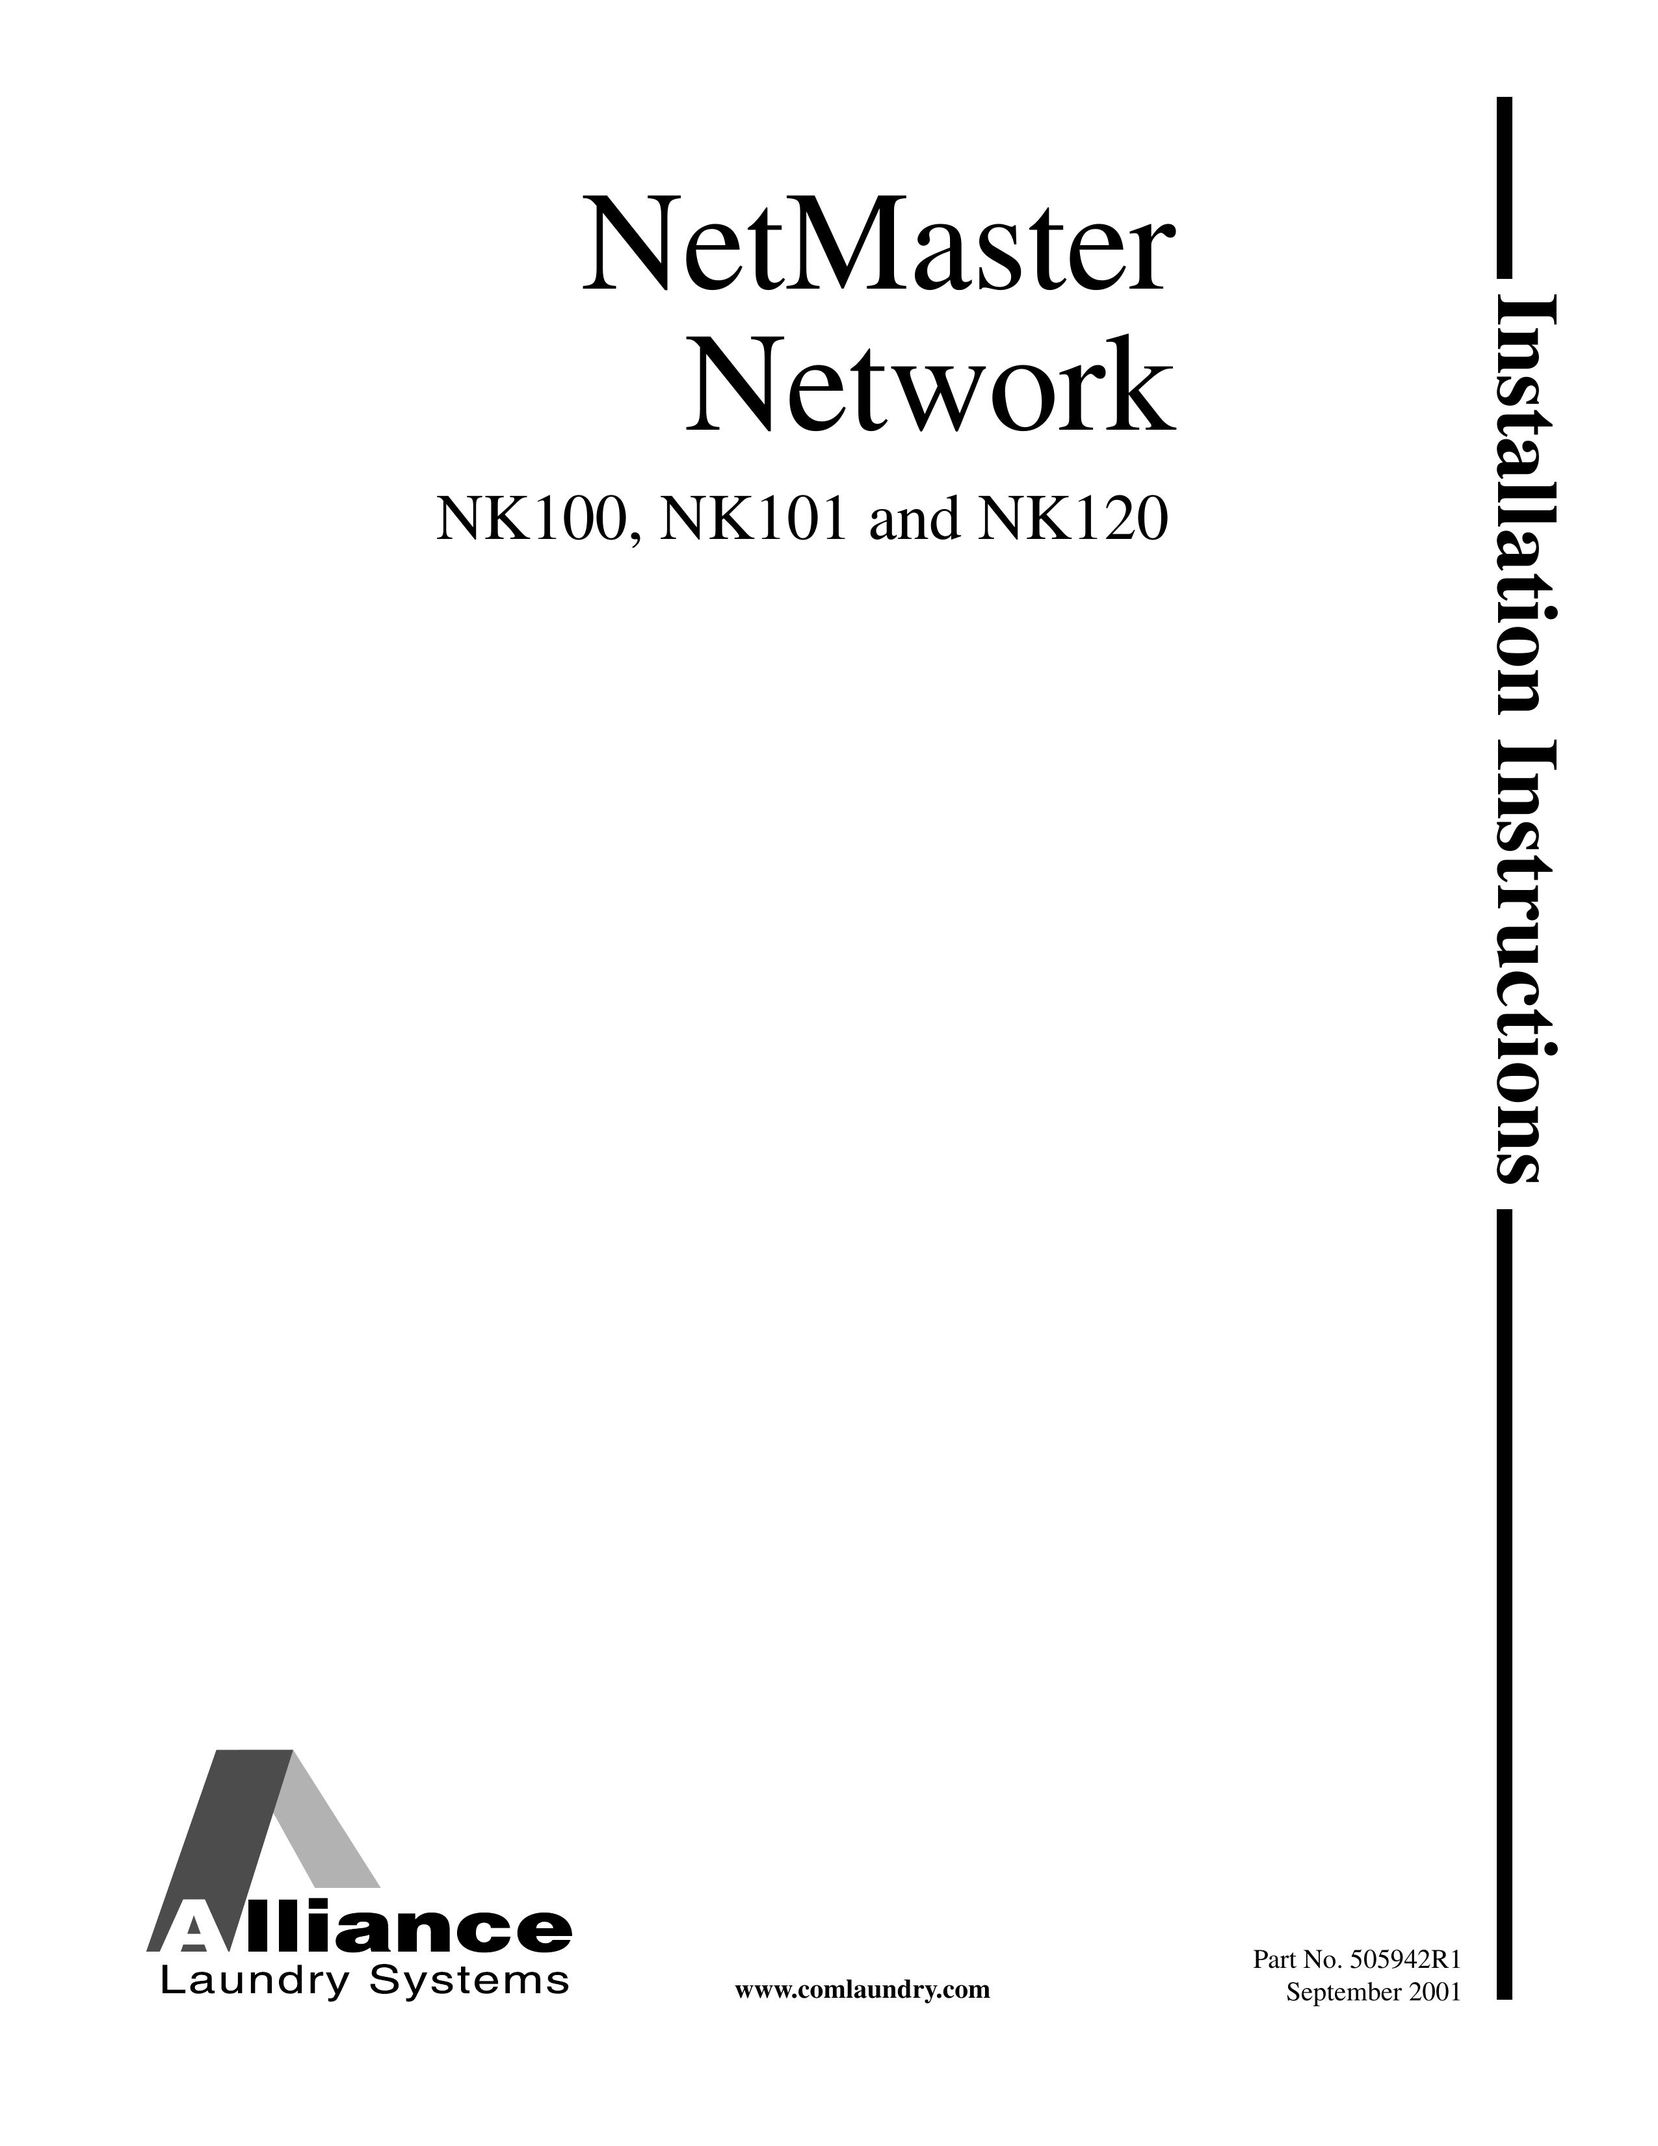 Alliance Laundry Systems NK120 Network Hardware User Manual